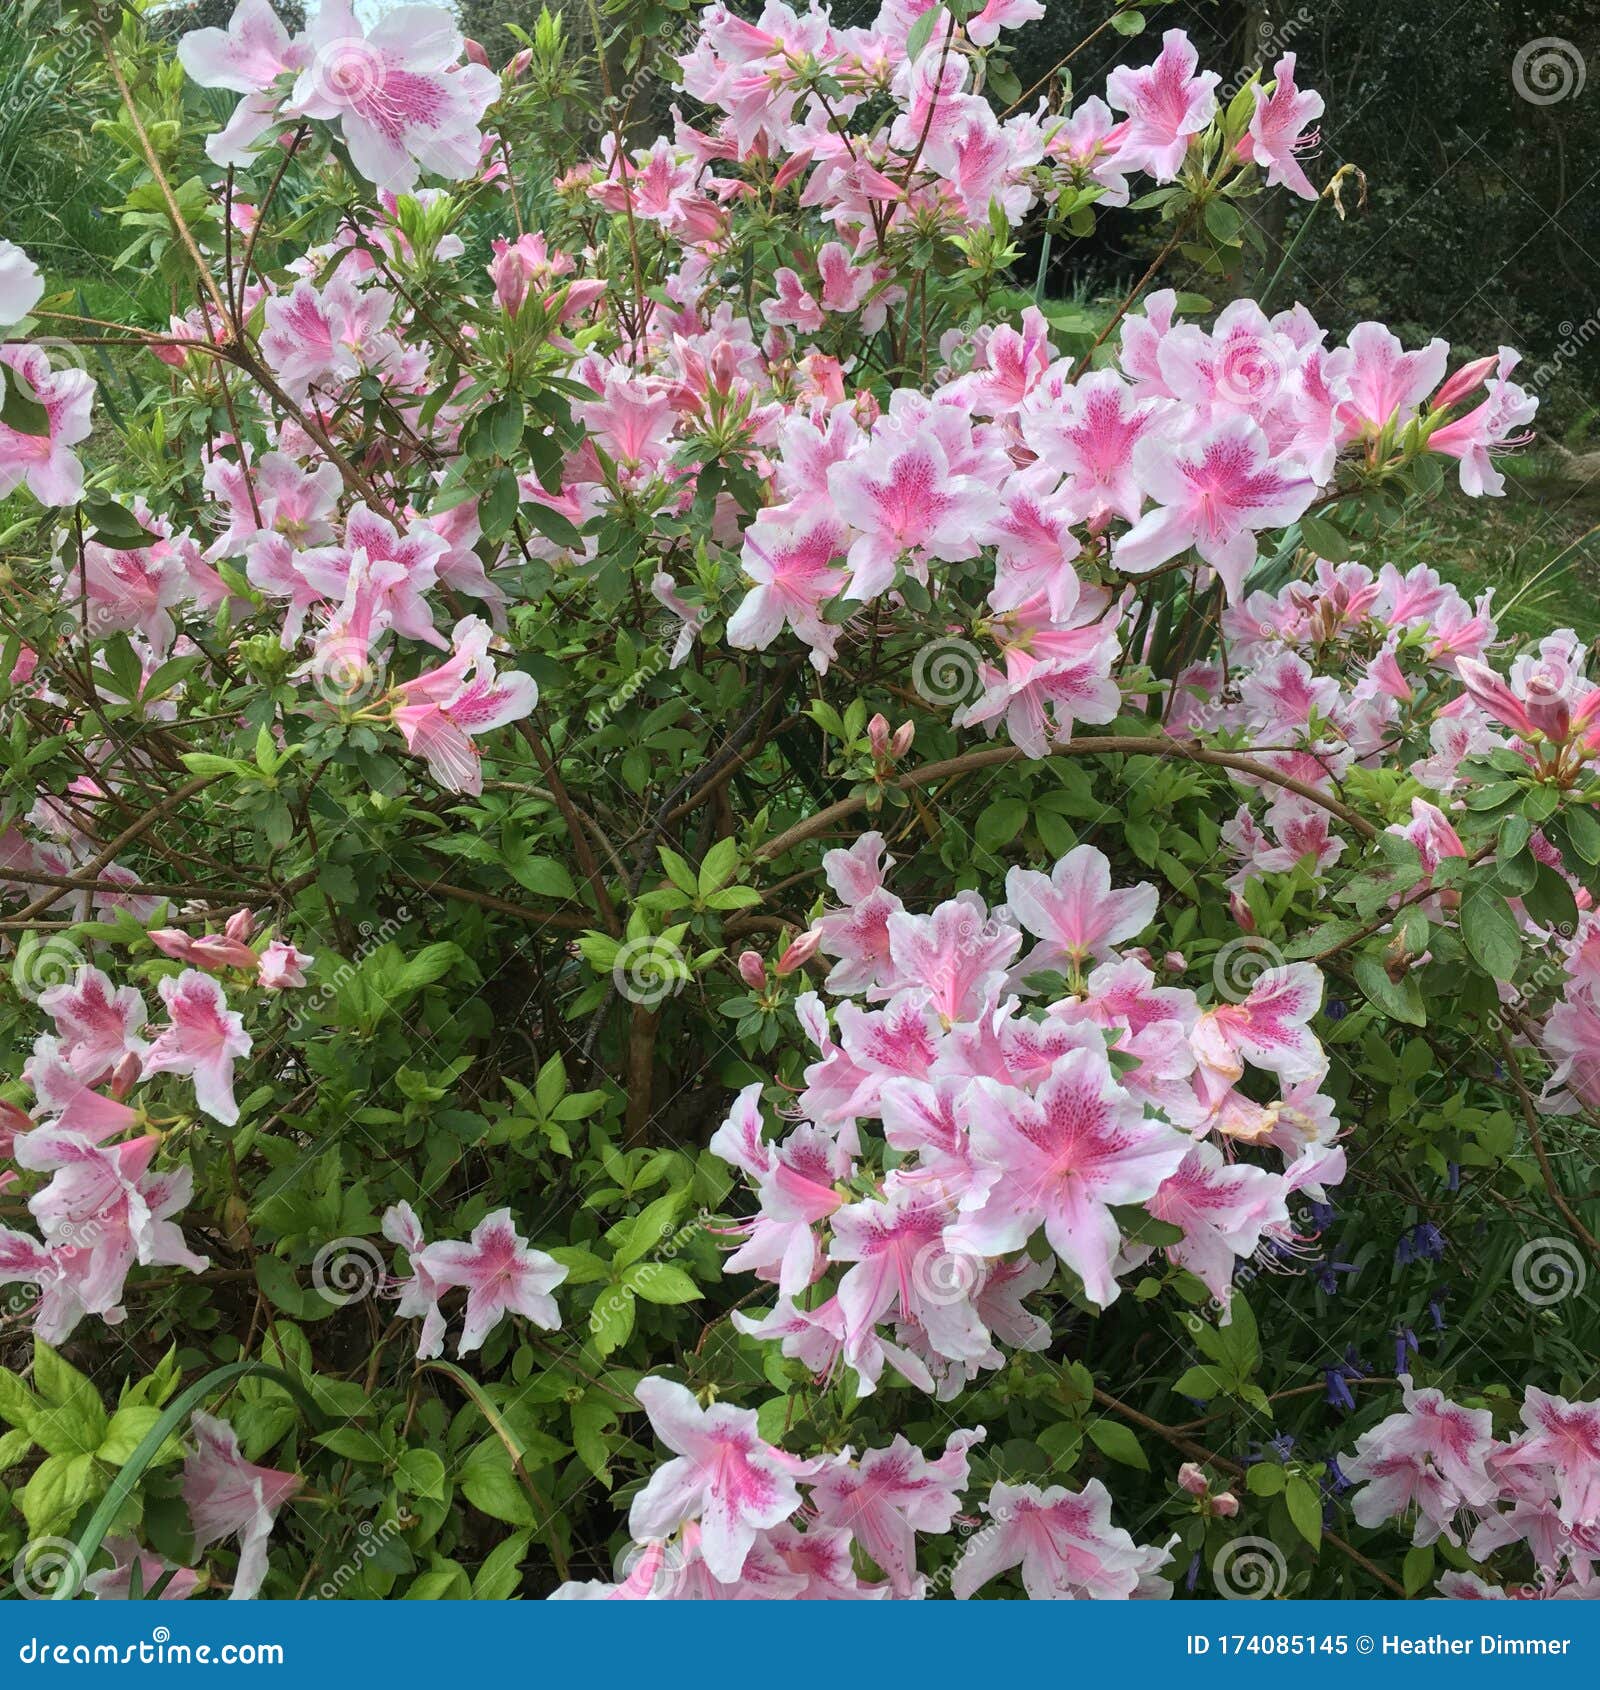 Albums 101+ Images bush with pink and white flowers Updated